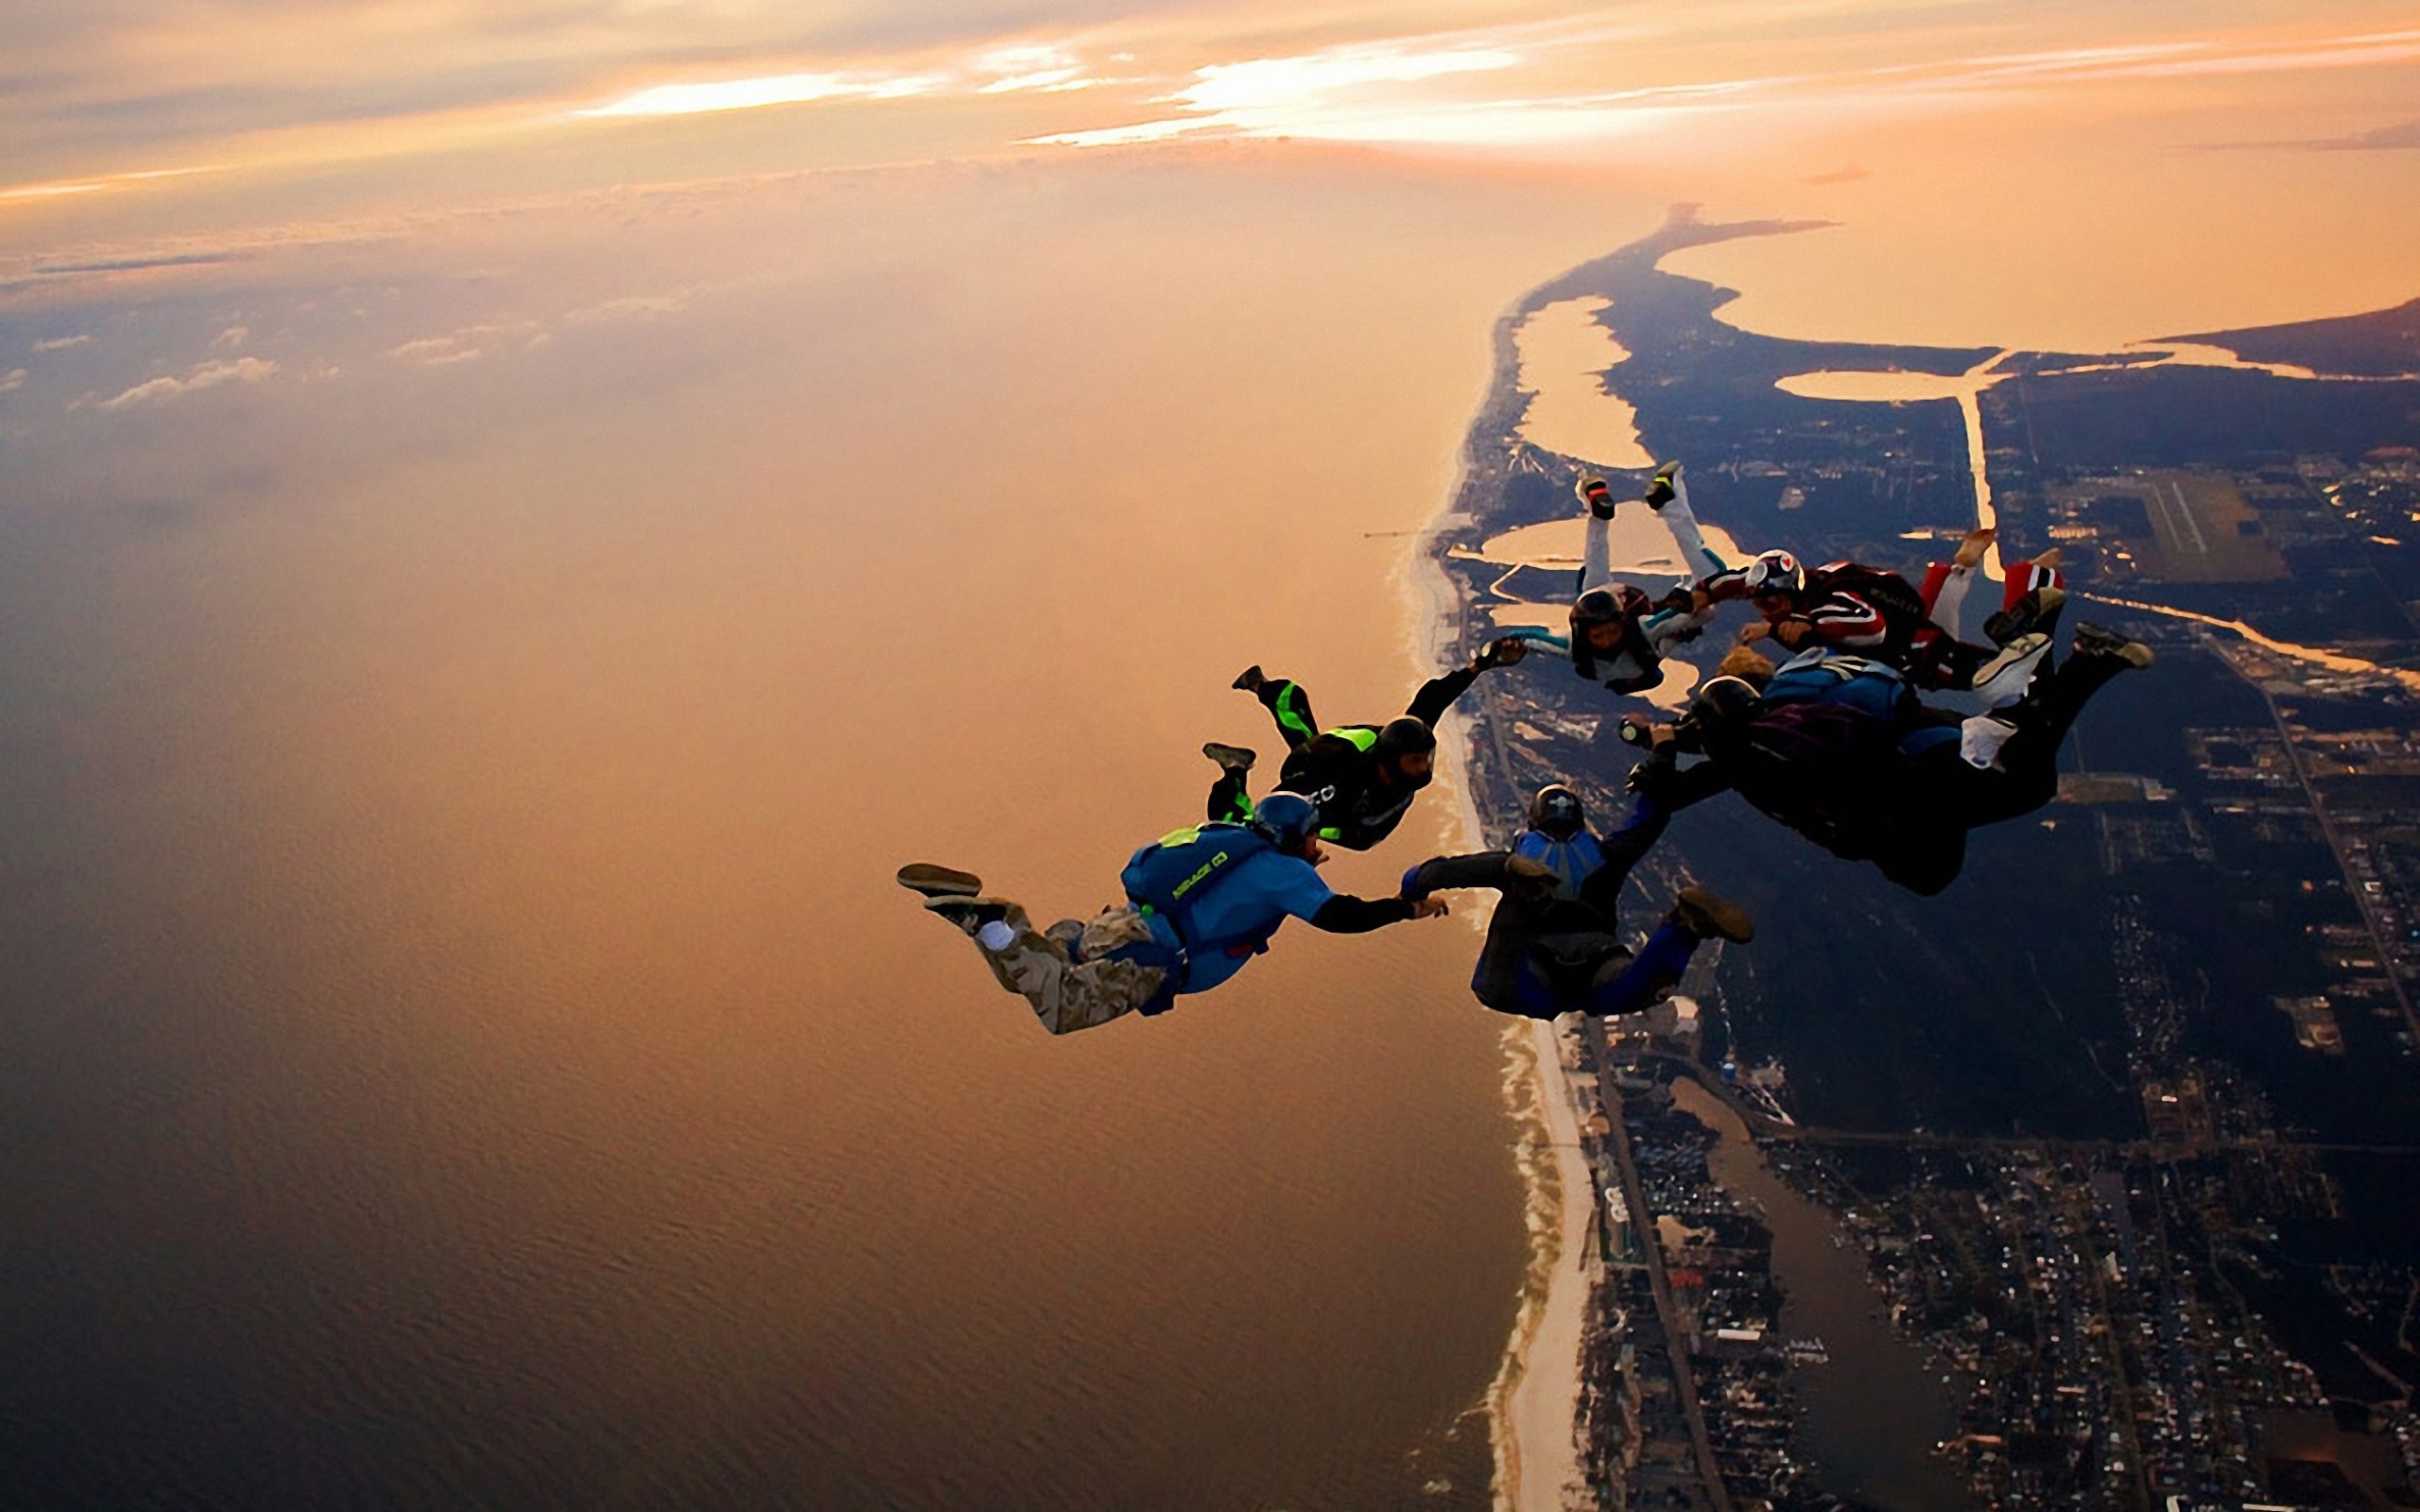 Related Wallpapers. Skydive ...